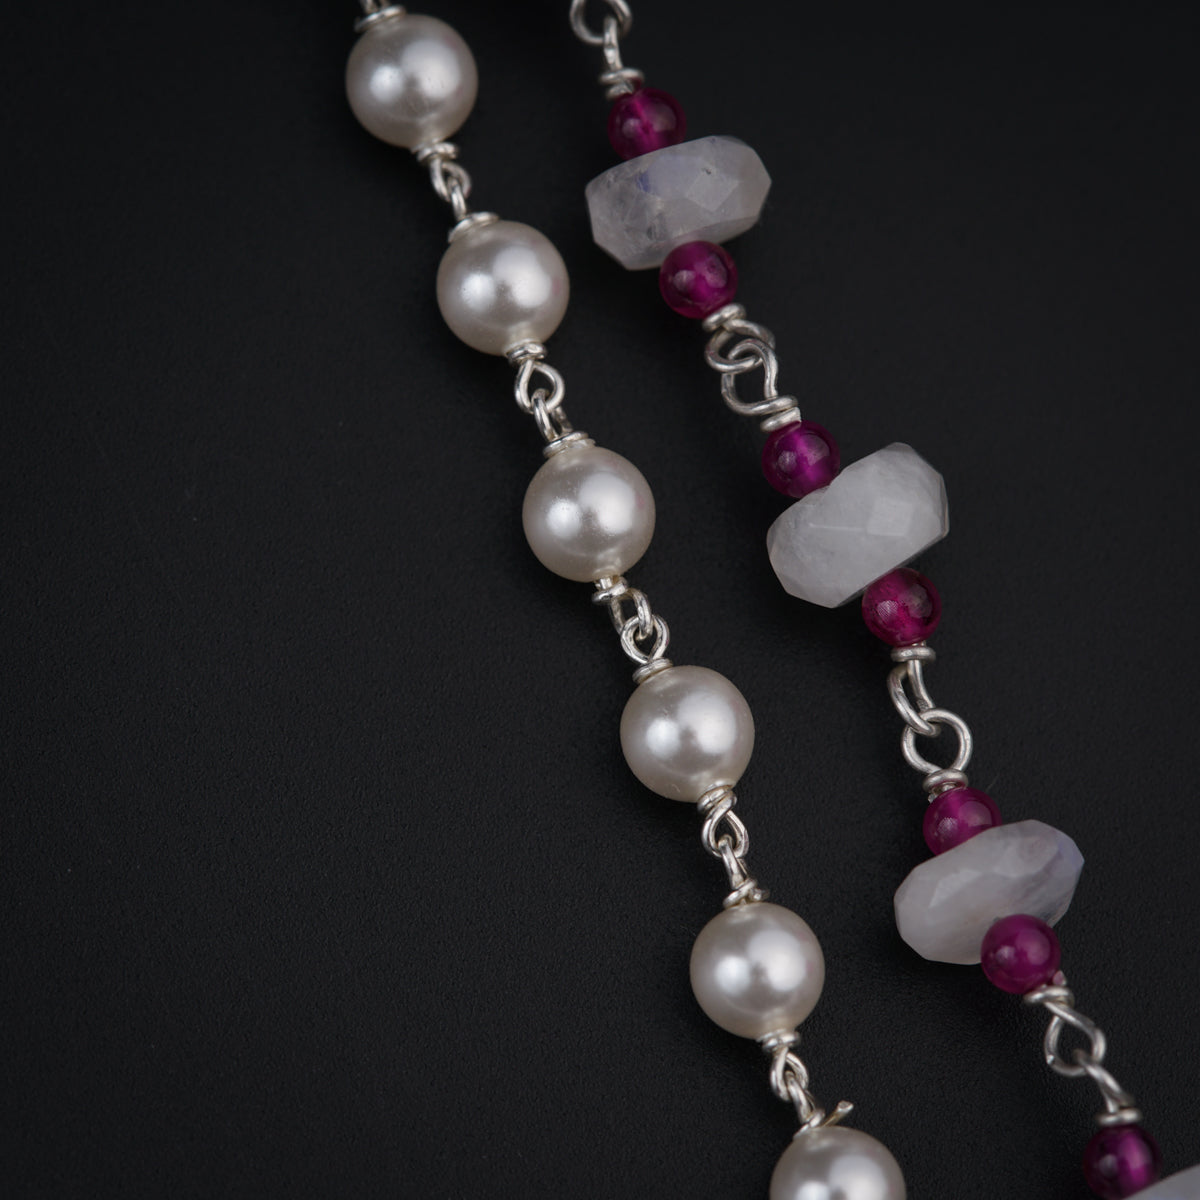 a close up of a necklace with pearls and beads